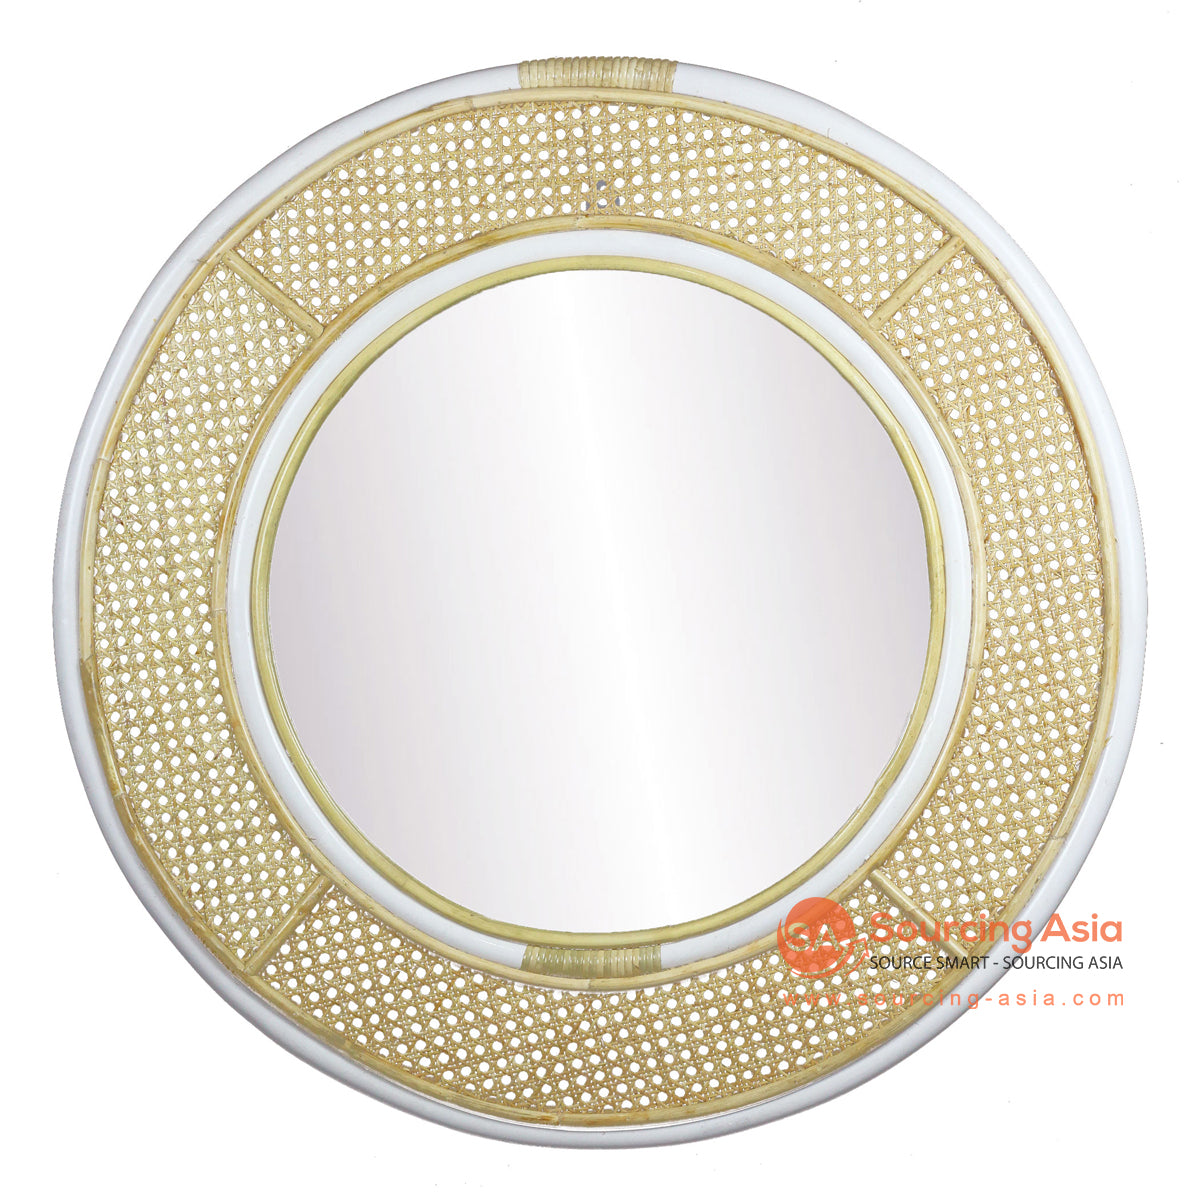 SHL399 WHITE AND NATURAL RATTAN ROUND MIRROR (WITH 50CM MIRROR)